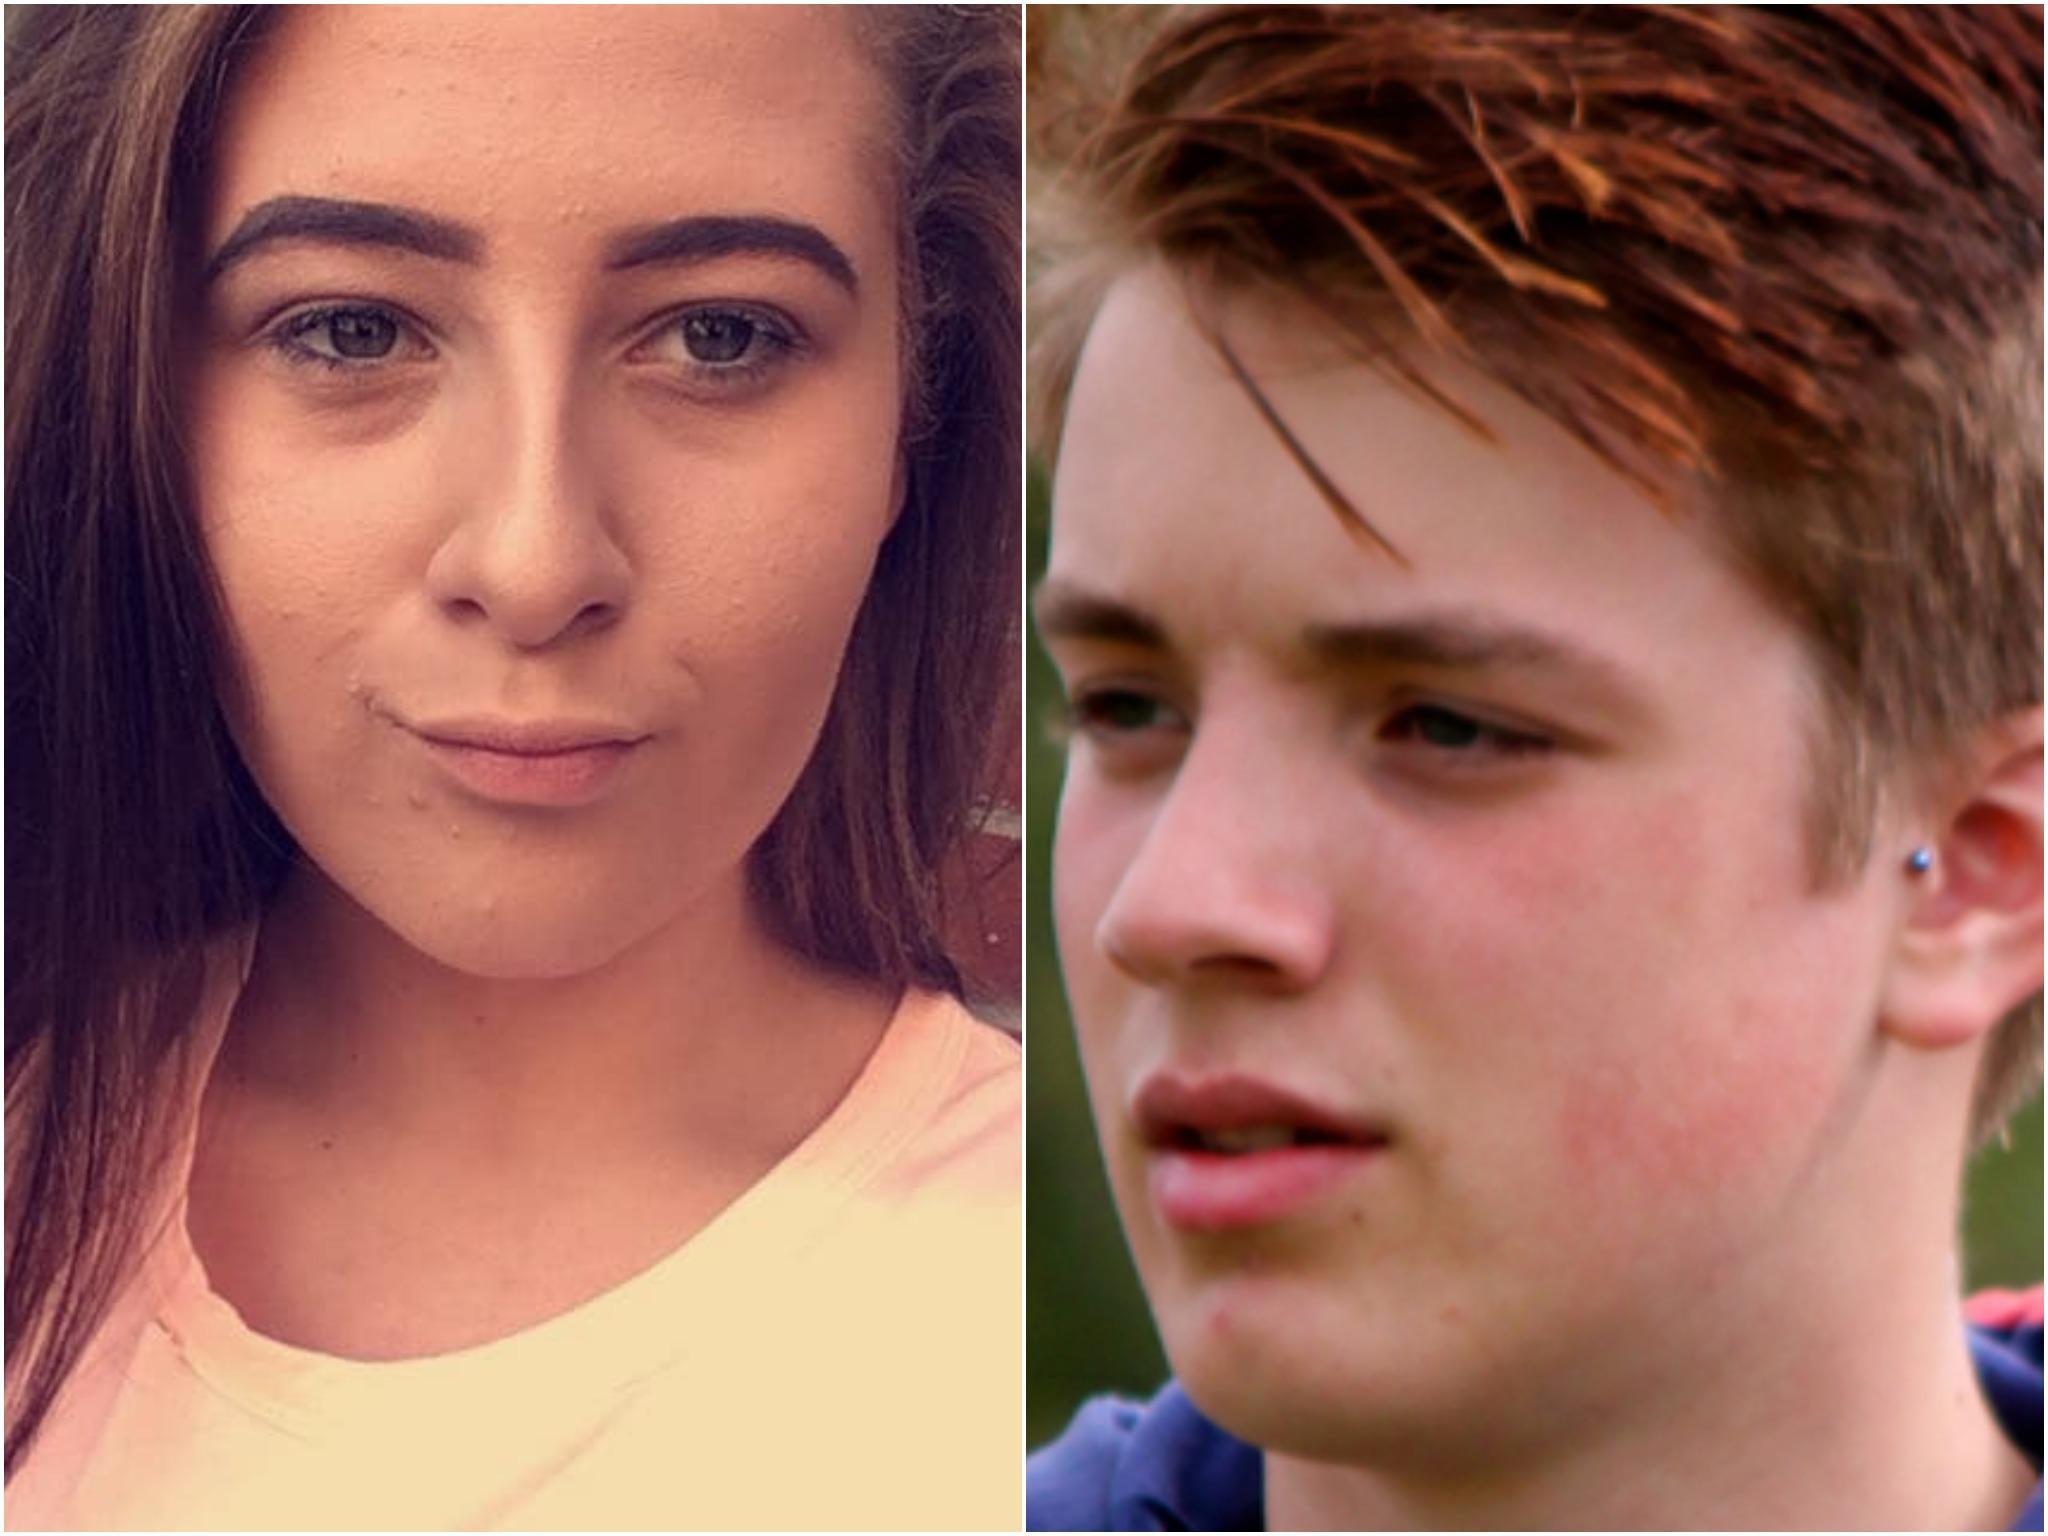 Georgia Jones and Daniel Spargo-Mabbs both died after taking high-strength ecstasy